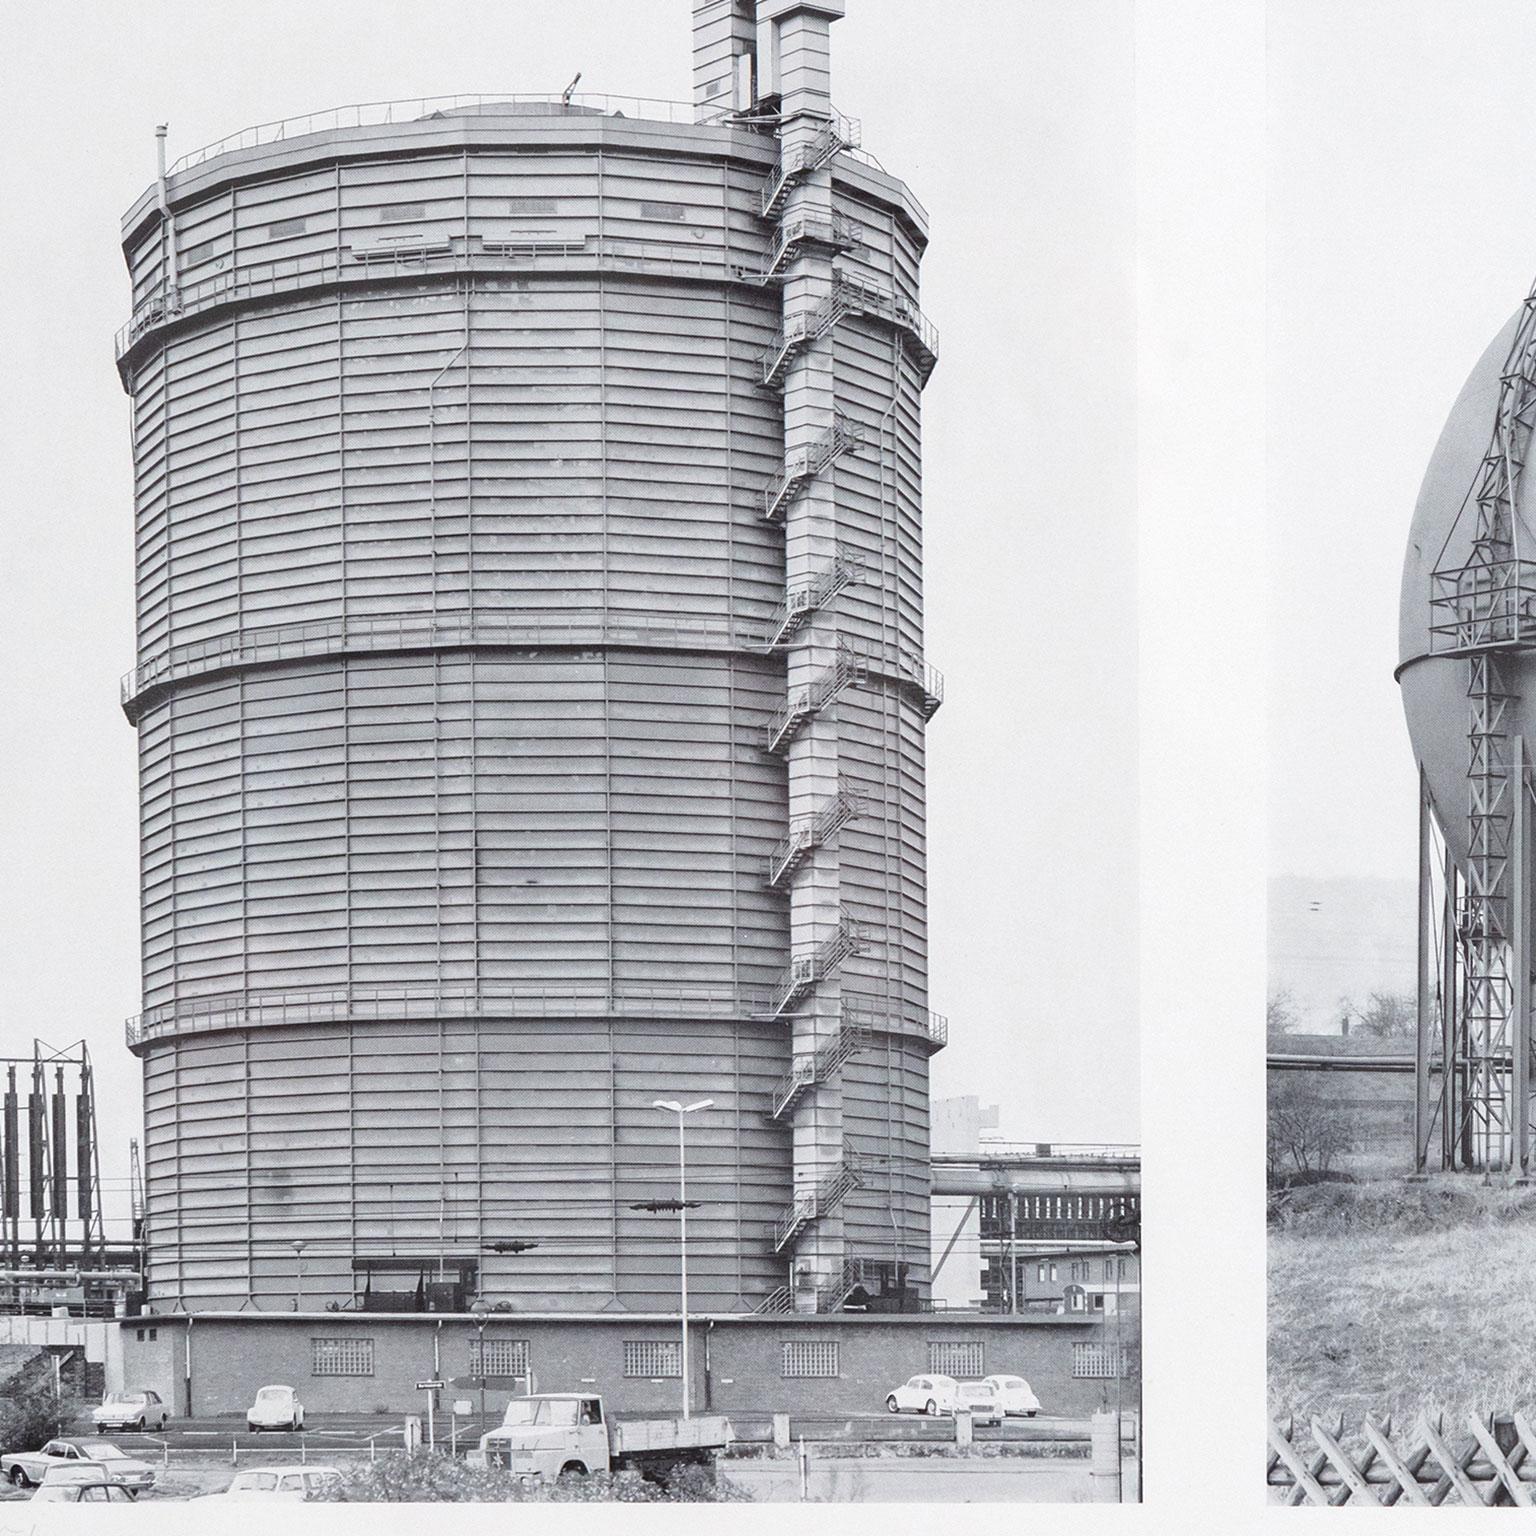 Bernd & Hilla Becher had a tremendous influence on documentary photography and sub-genres of industrial/architectural photography and minimalism.

The couple began working together in 1959 and were dedicated to documenting the sculptural elements of